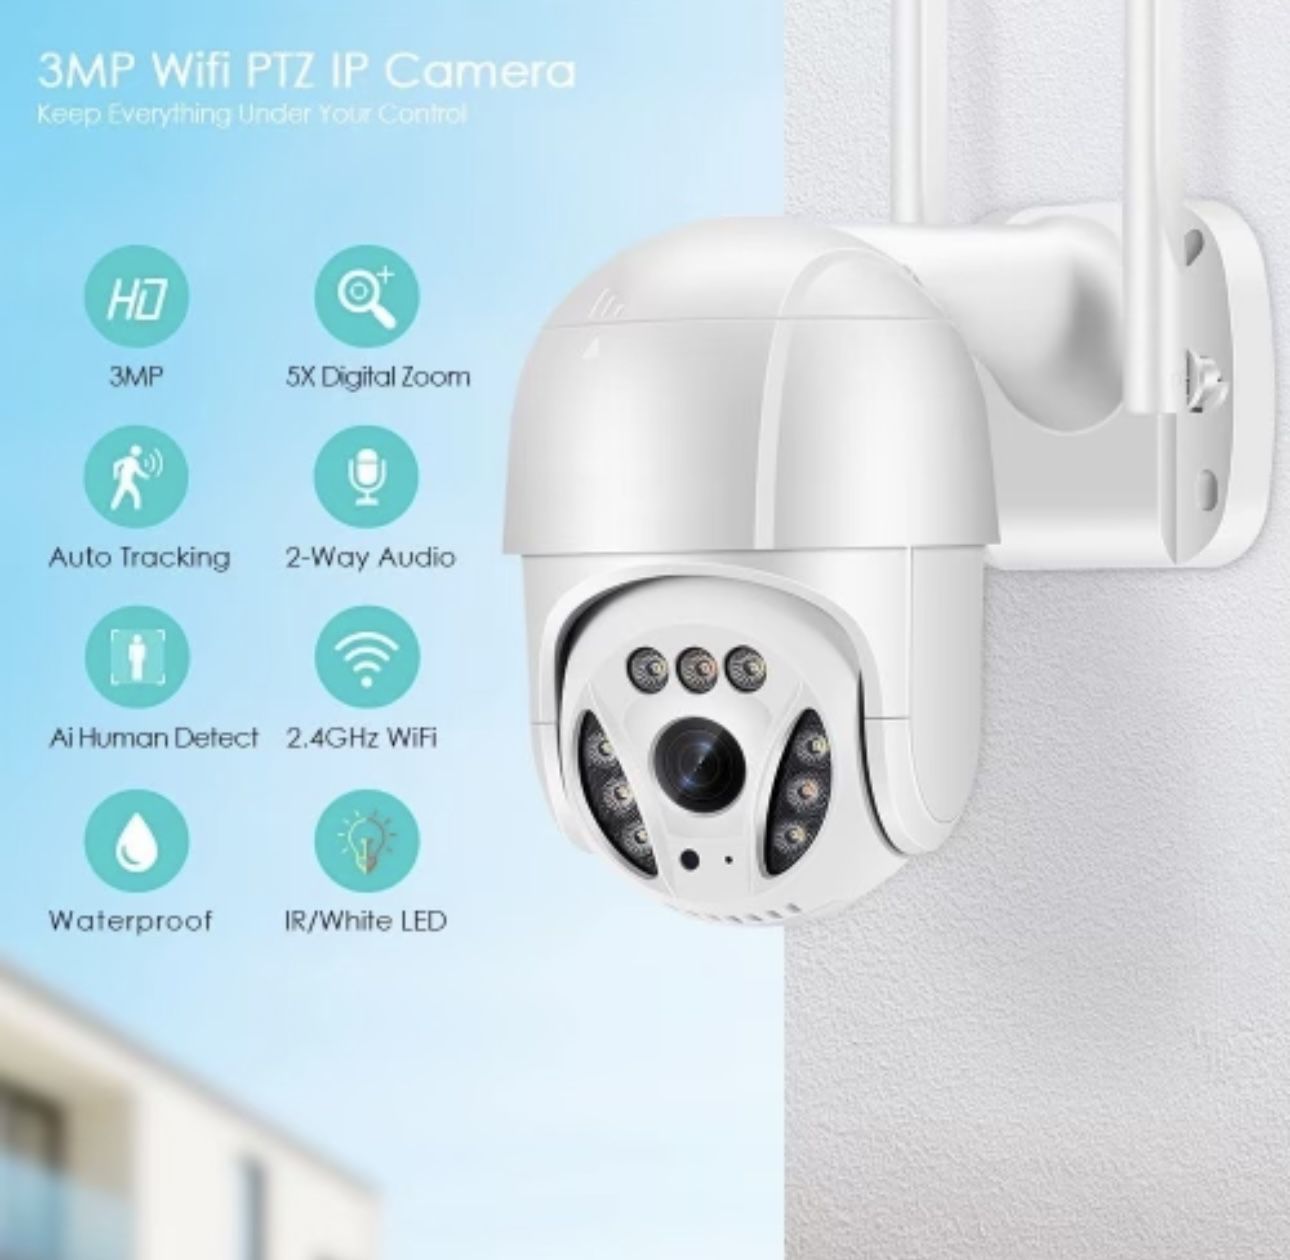 New outdoor Ptz Wireless Wifi security camera with Intelligent Tracking 